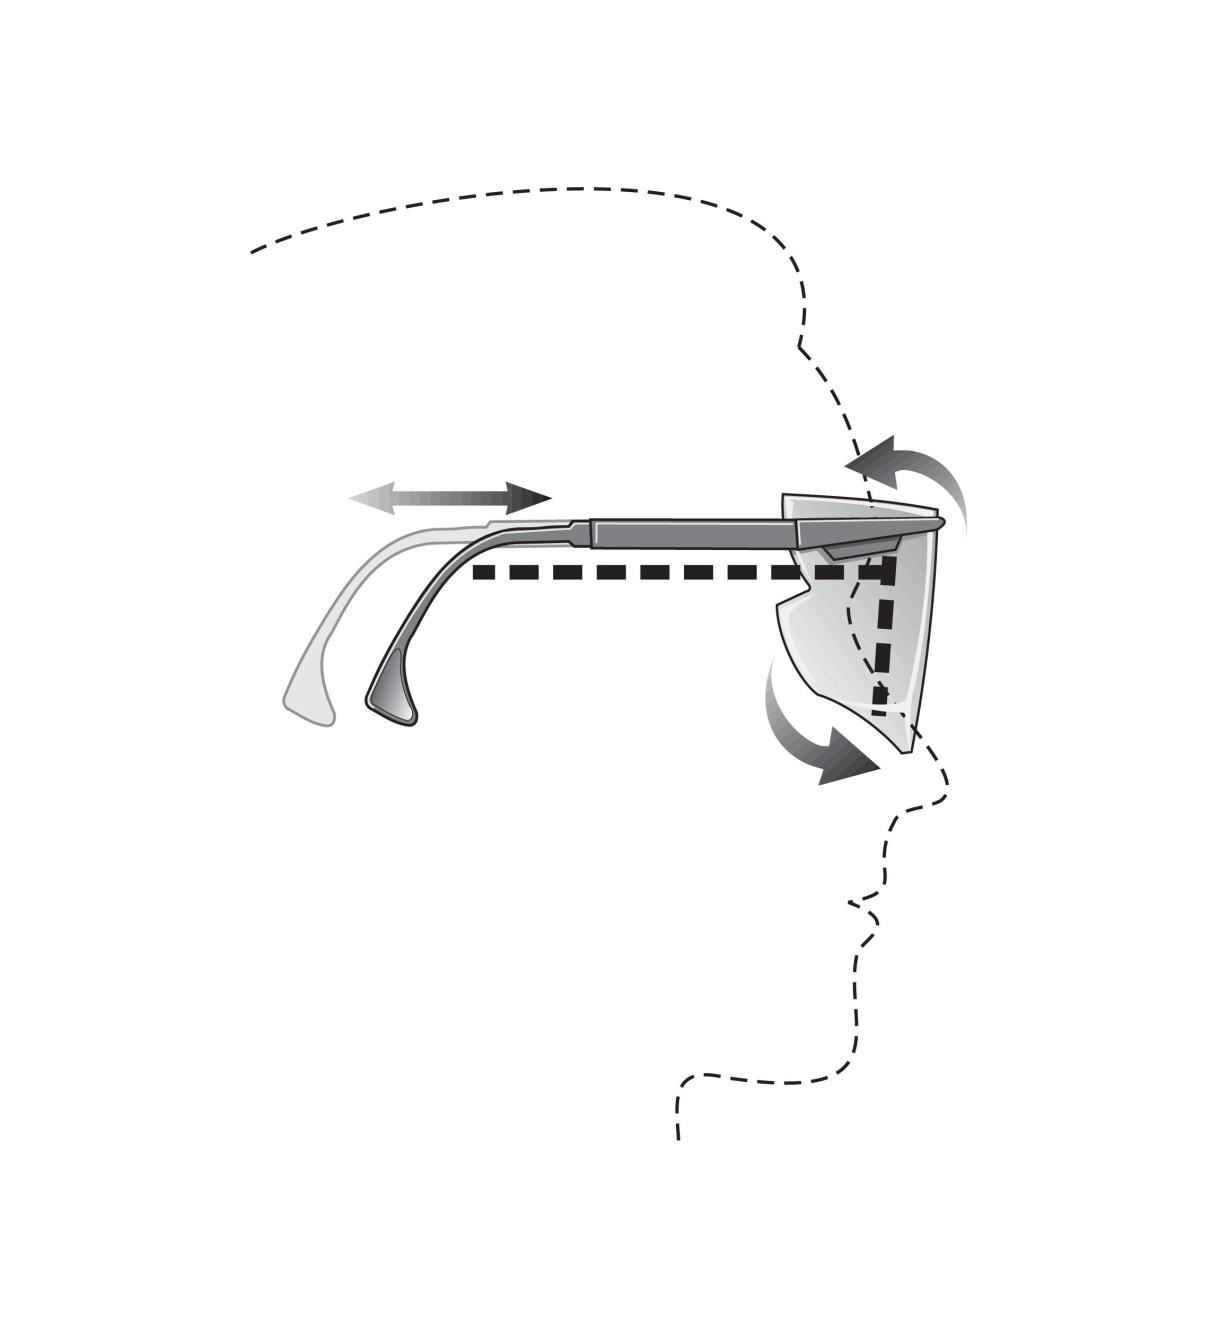 An illustration showing how the arms and lens pitch adjust on the overglasses